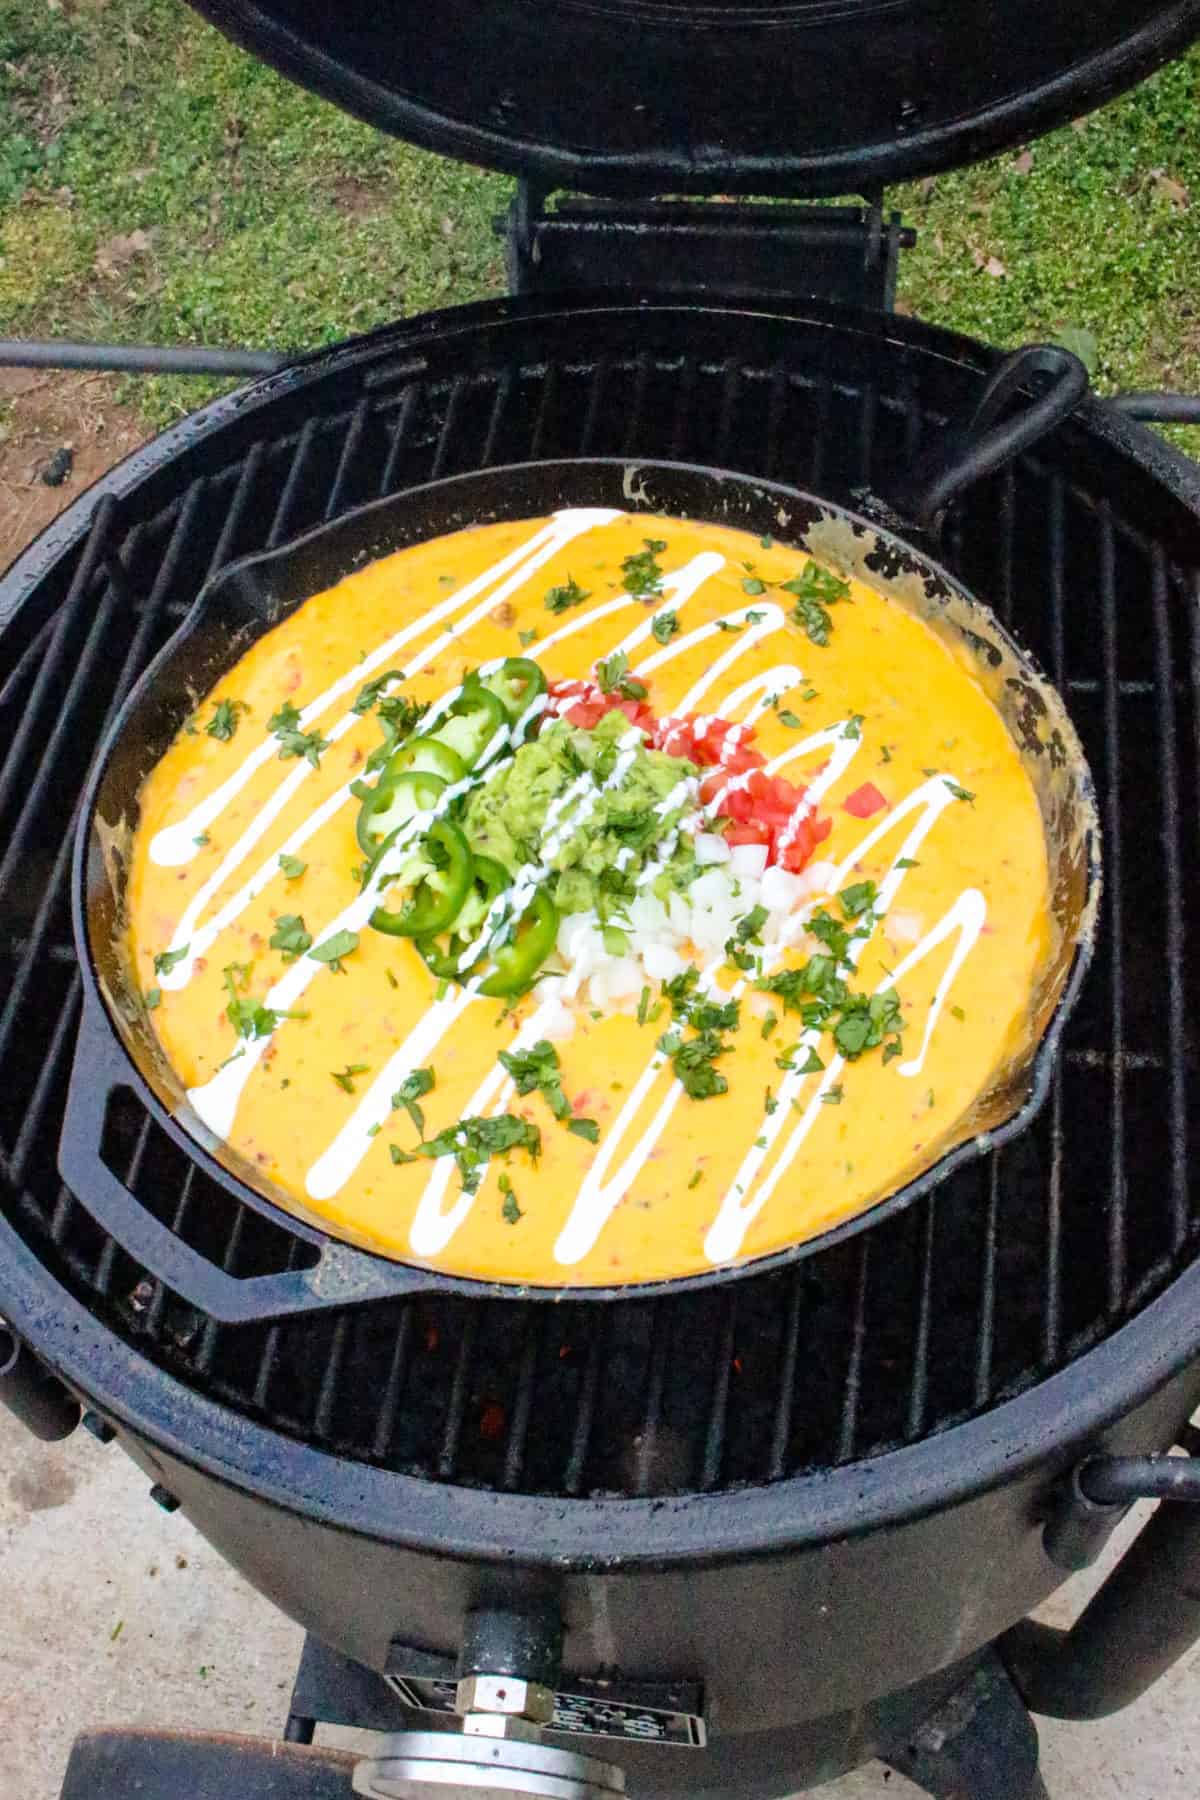 Smoked Chorizo Queso finished and sitting on the smoker.